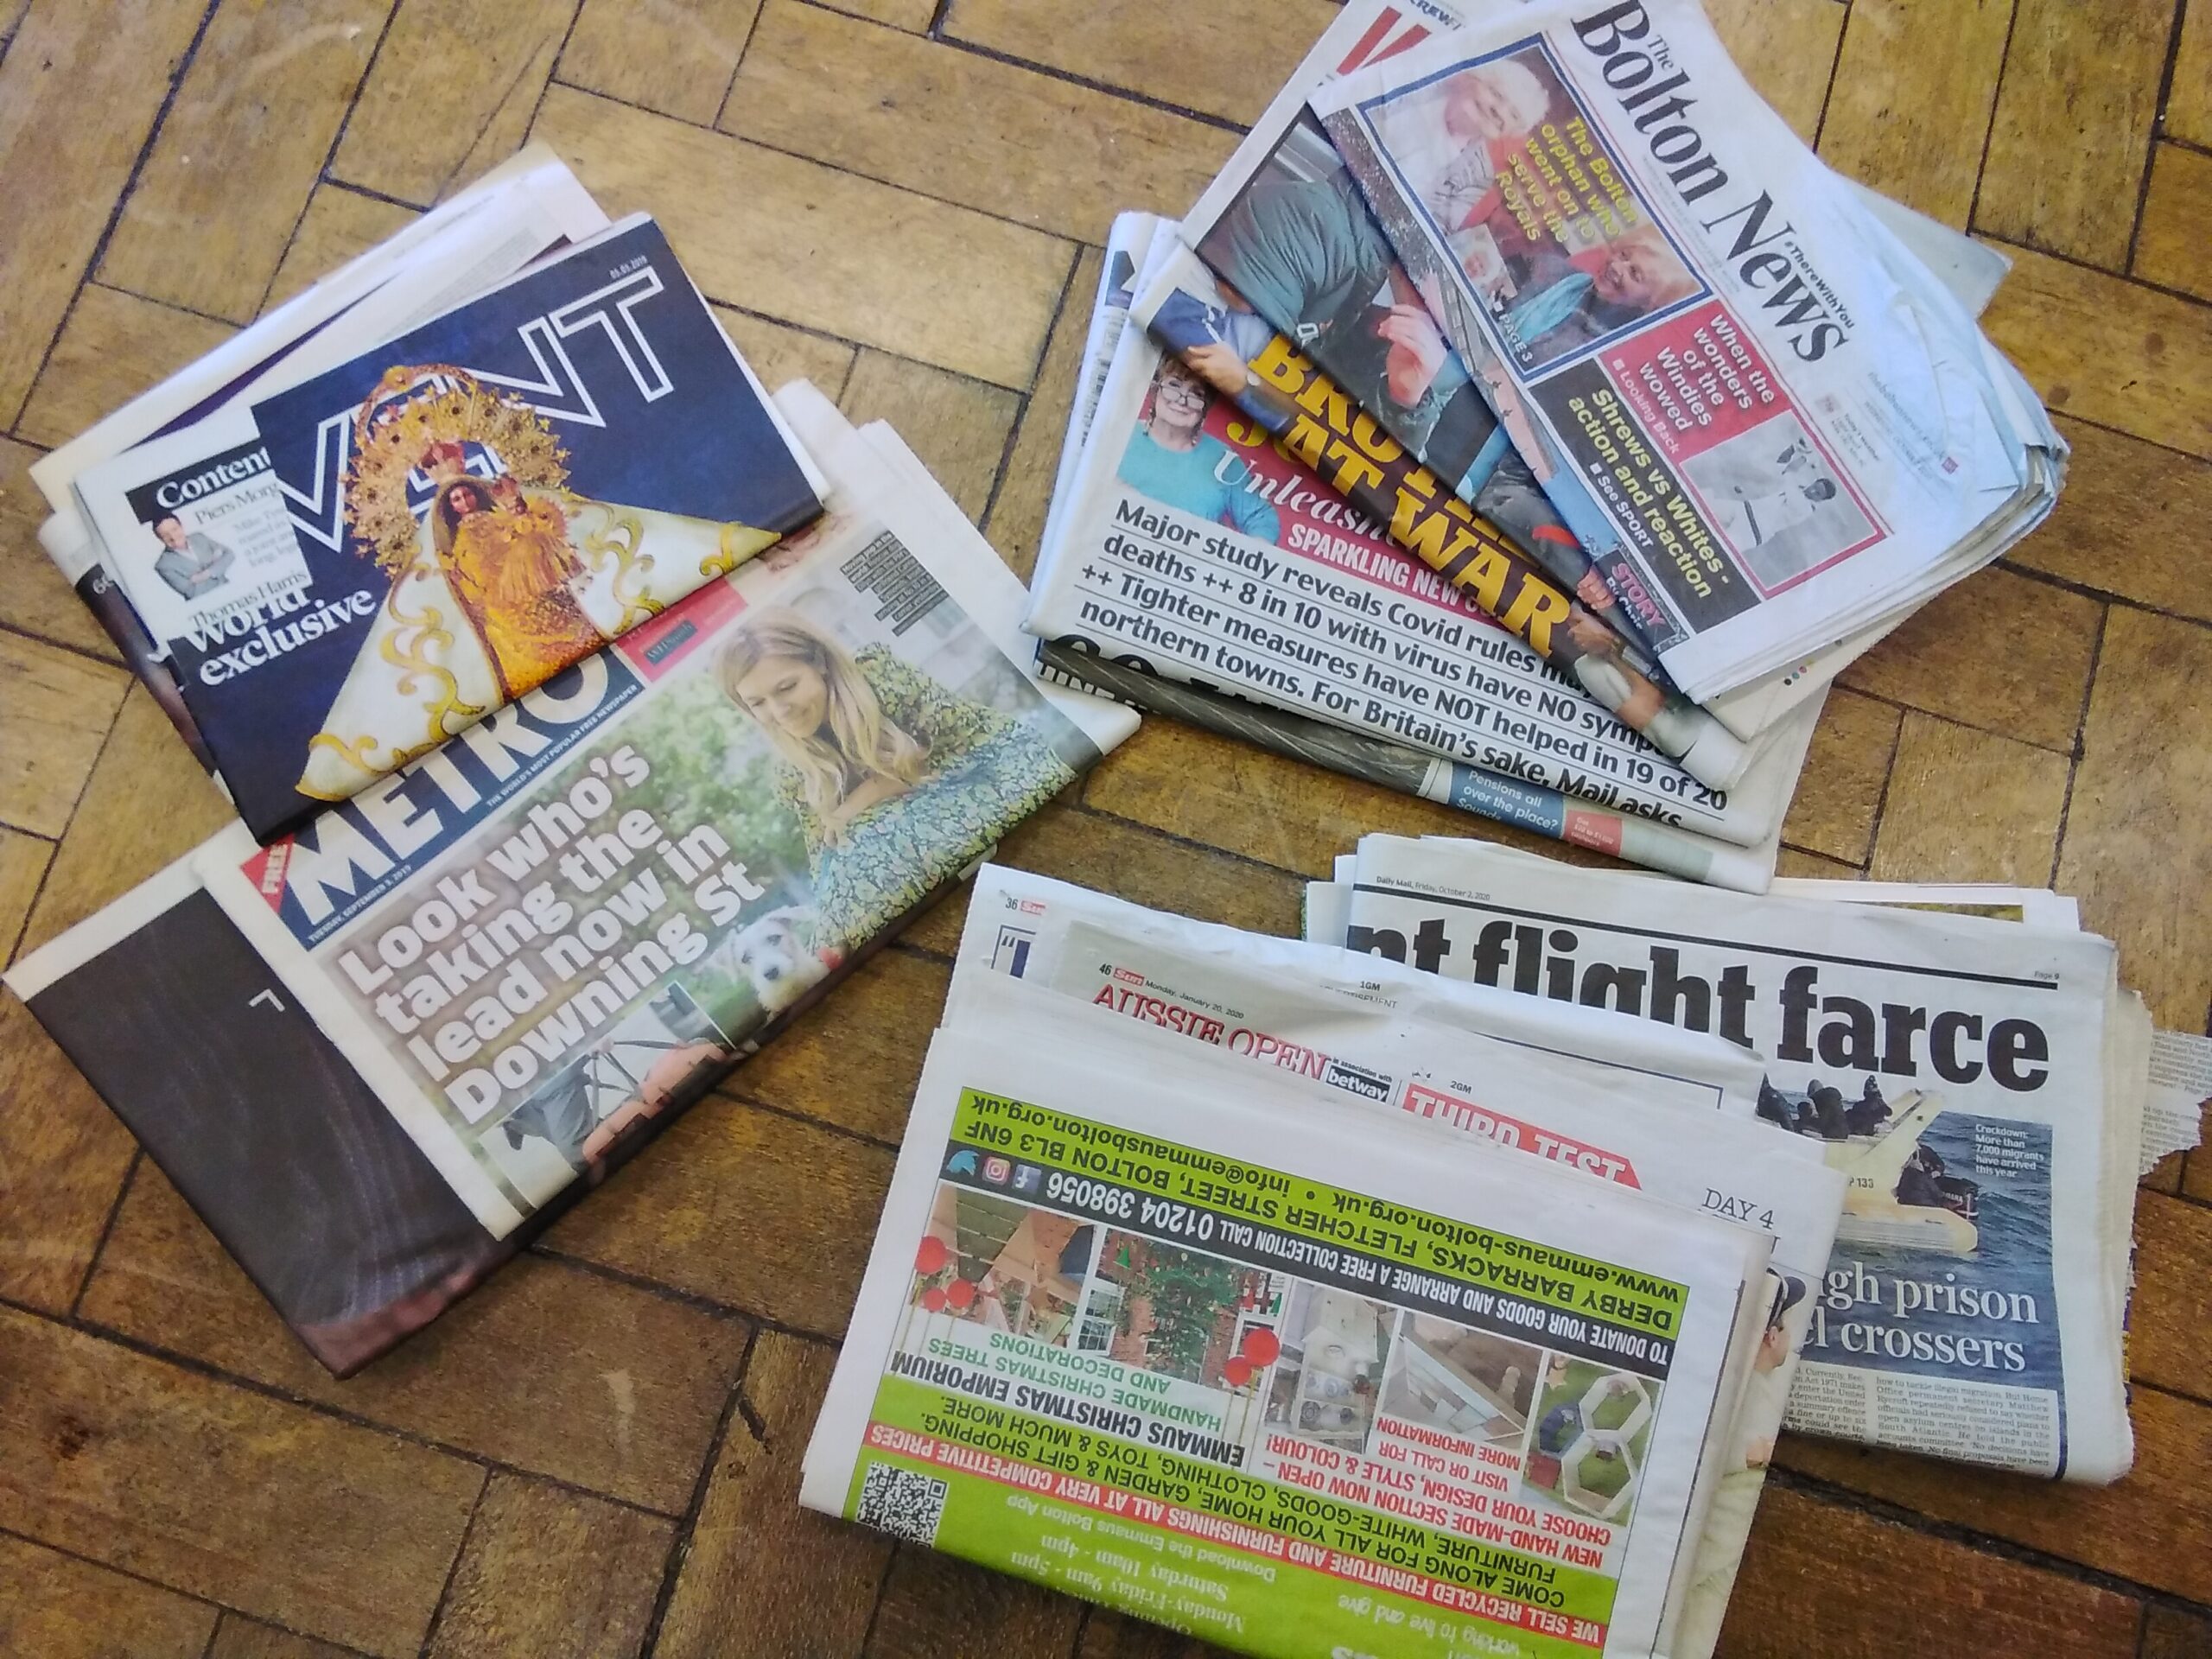 A colour photograph of a pile of newspapers scattered across the floor.